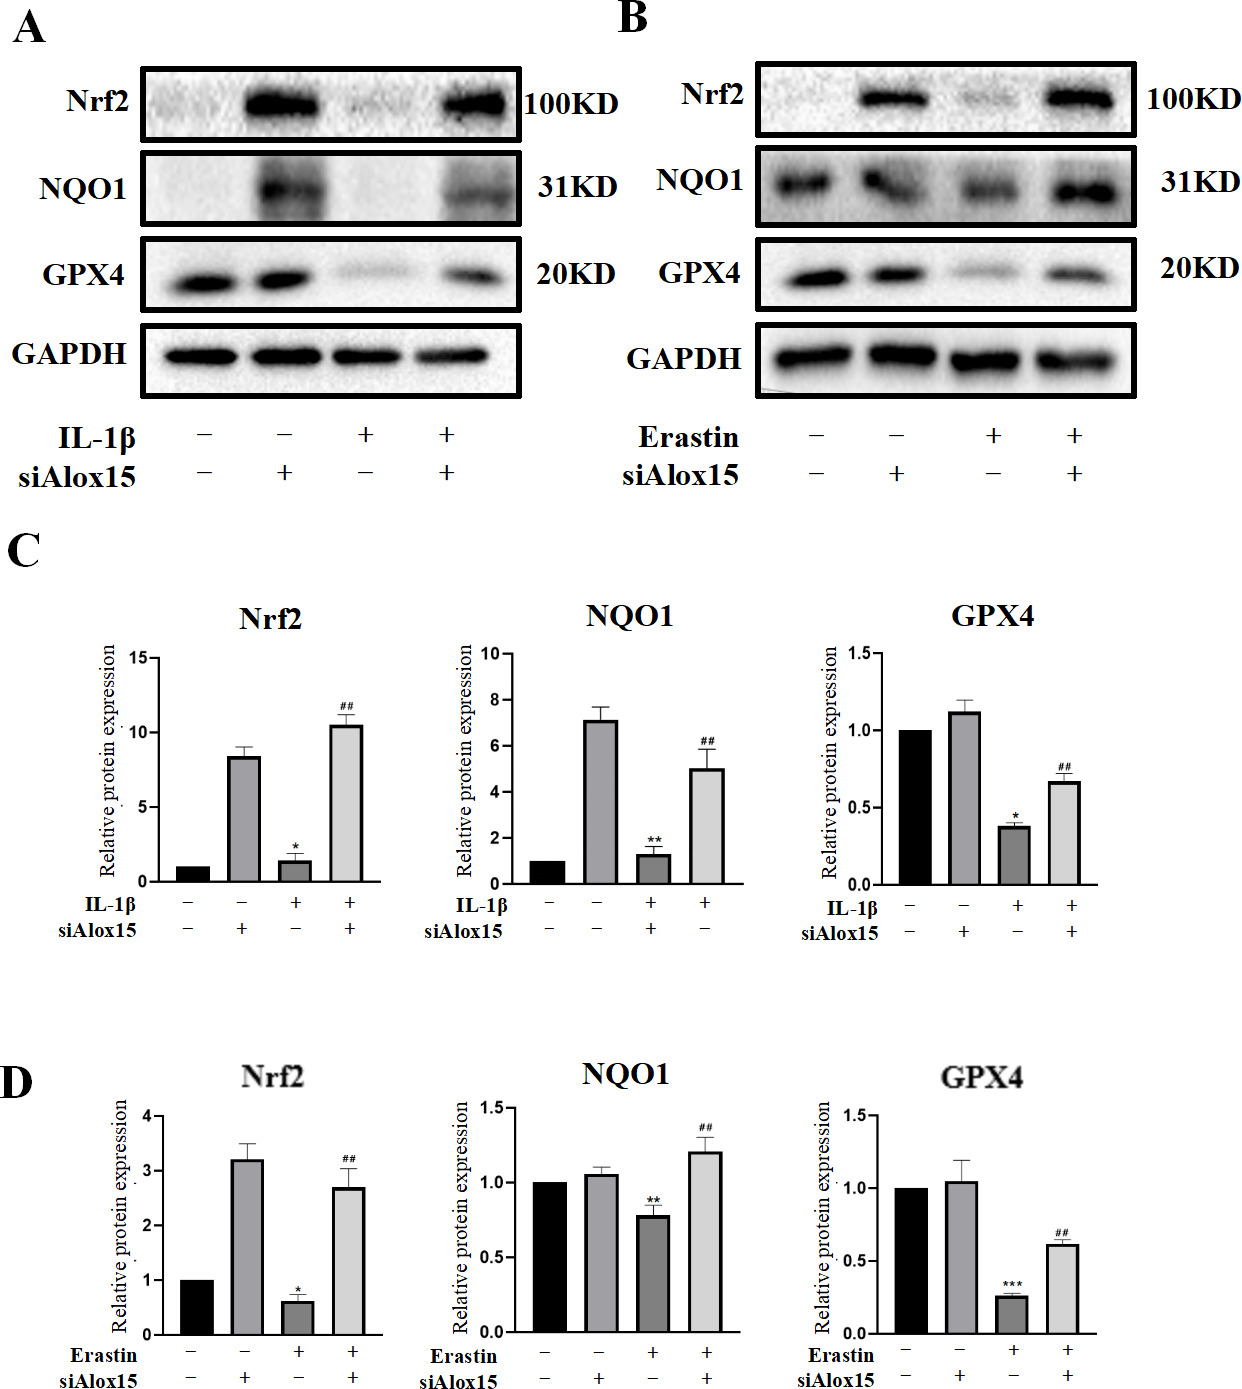 Fig. 5 
            Protective effect of nuclear factor-E2-related factor 2 (Nrf2) signalling on chondrocytes induced by interleukin-1β (IL-1β) or Erastin increased after arachidonate 15-lipoxygenase (Alox15) knockdown. a) to d) Western blot analysis was conducted to detect the protein expression of Nrf2, NAD(P)H:quinone oxidoreductase 1 (NQO1), and glutathione peroxidase 4 (GPX4) in chondrocytes treated with IL-1β (10 ng/ml) or Erastin (5 μM) and subjected to Alox15 knockdown. Densitometry analysis was conducted to quantify the band density ratios of Nrf2, NQO1, and GPX4 to glyceraldehyde 3-phosphate dehydrogenase (GAPDH) (experiments repeated three times each). These data were statistically analyzed by independent-samples t-test and are presented as the mean and standard deviation. *p < 0.05 vs the negative control group. #p < 0.05 vs the IL-1β group or Erastin group. **p < 0.005 .
          